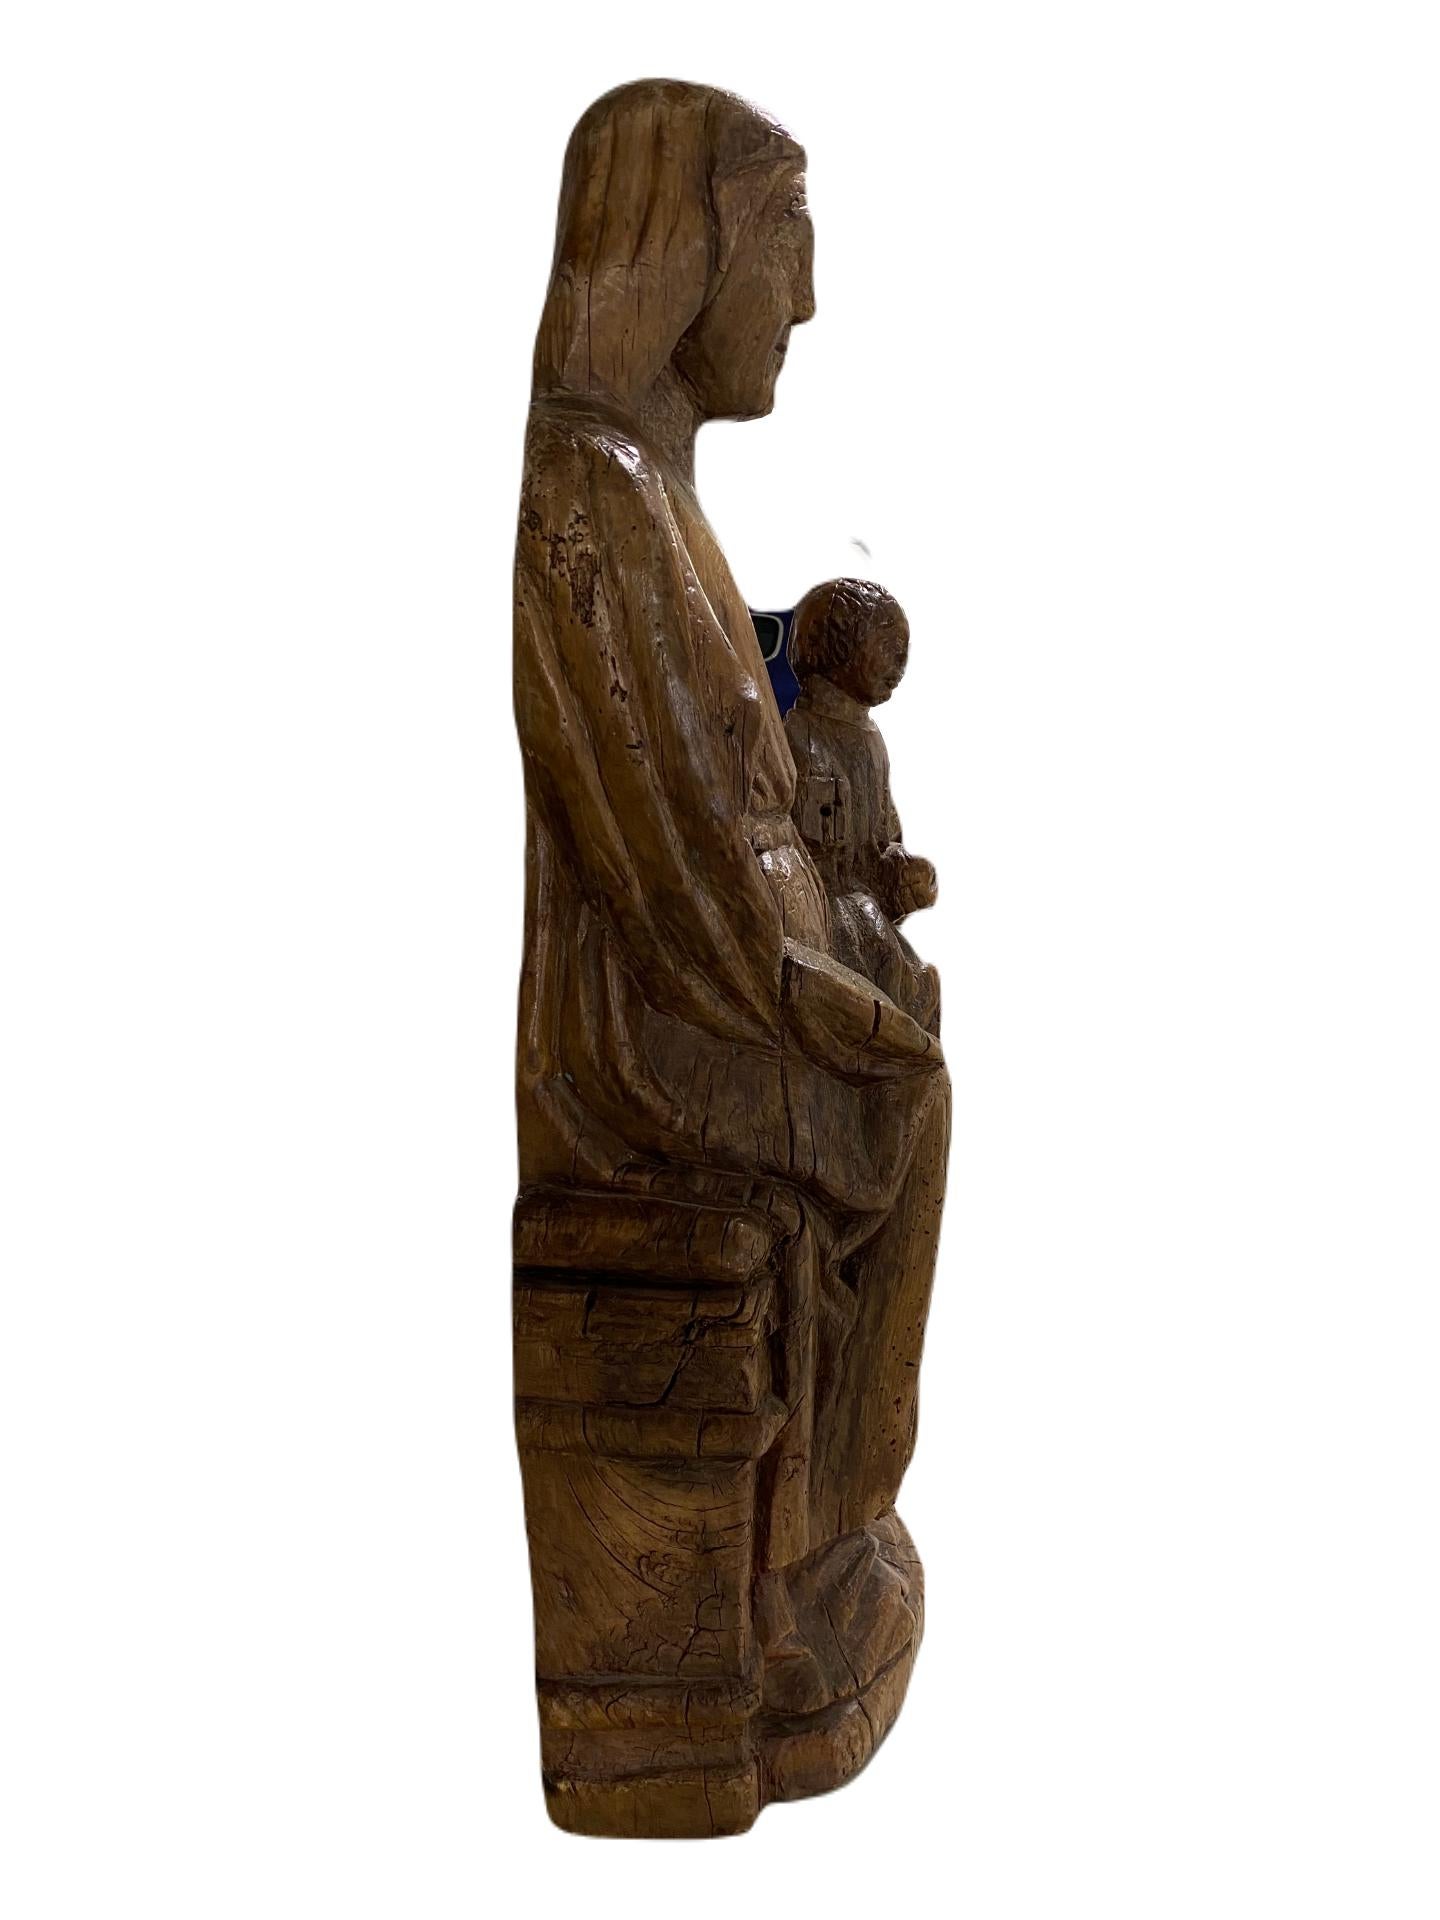 Enthroned Madonna and Child.  - Sculpture by Unknown